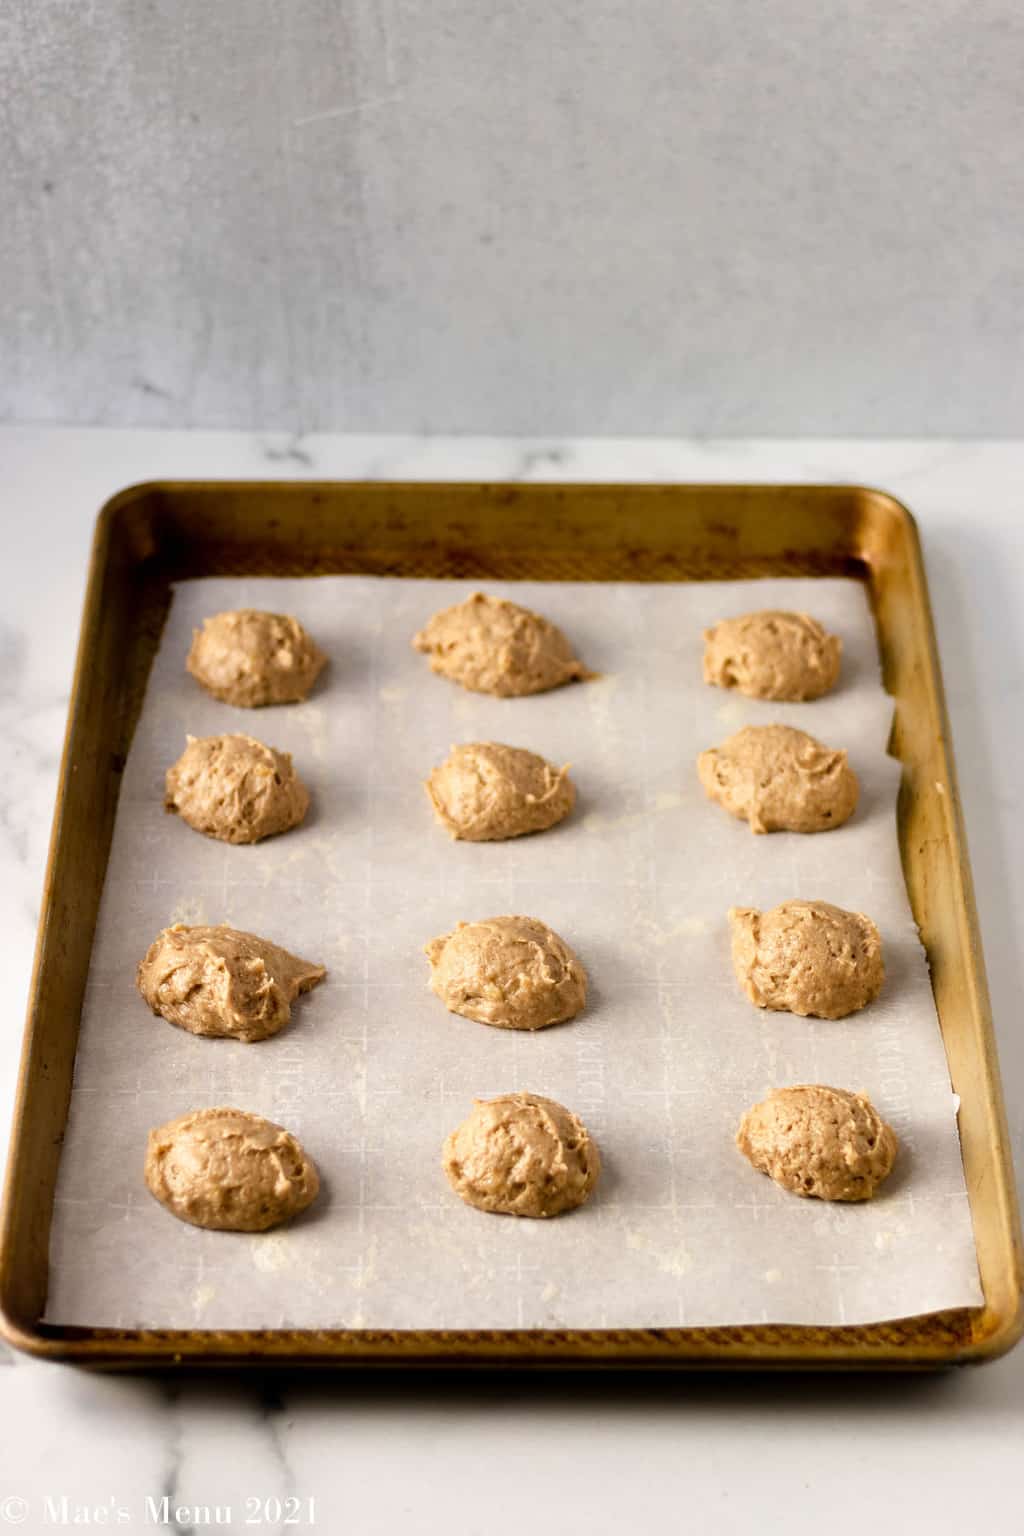 A baking sheet with scoops of banana bread cookies